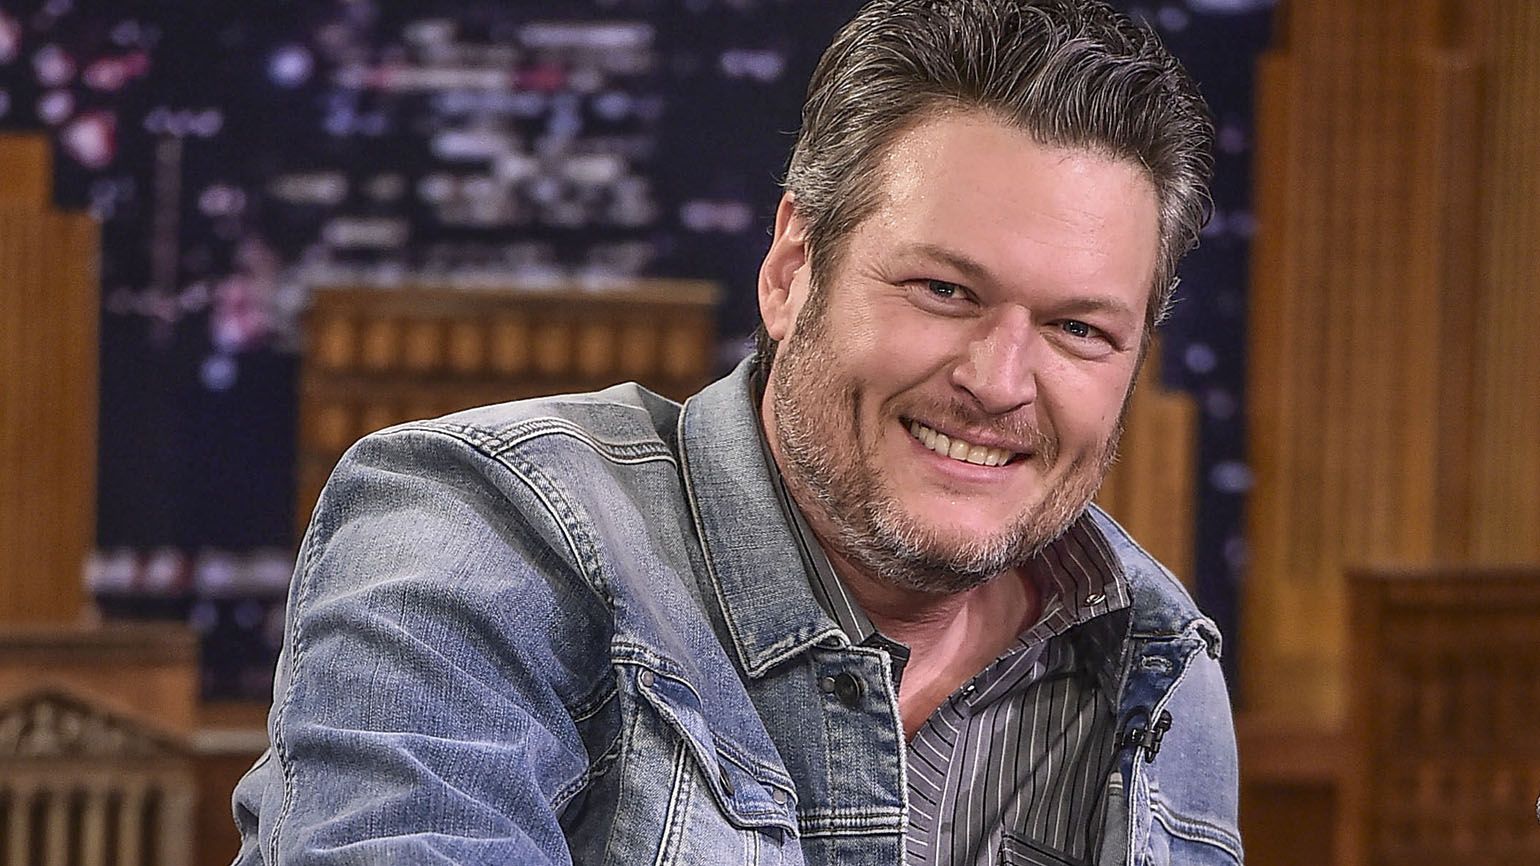 Blake Shelton Visits "The Tonight Show Starring Jimmy Fallon" at Rockefeller Center on March 19, 2018 in New York City. Credit: Theo Wargo/Getty Images